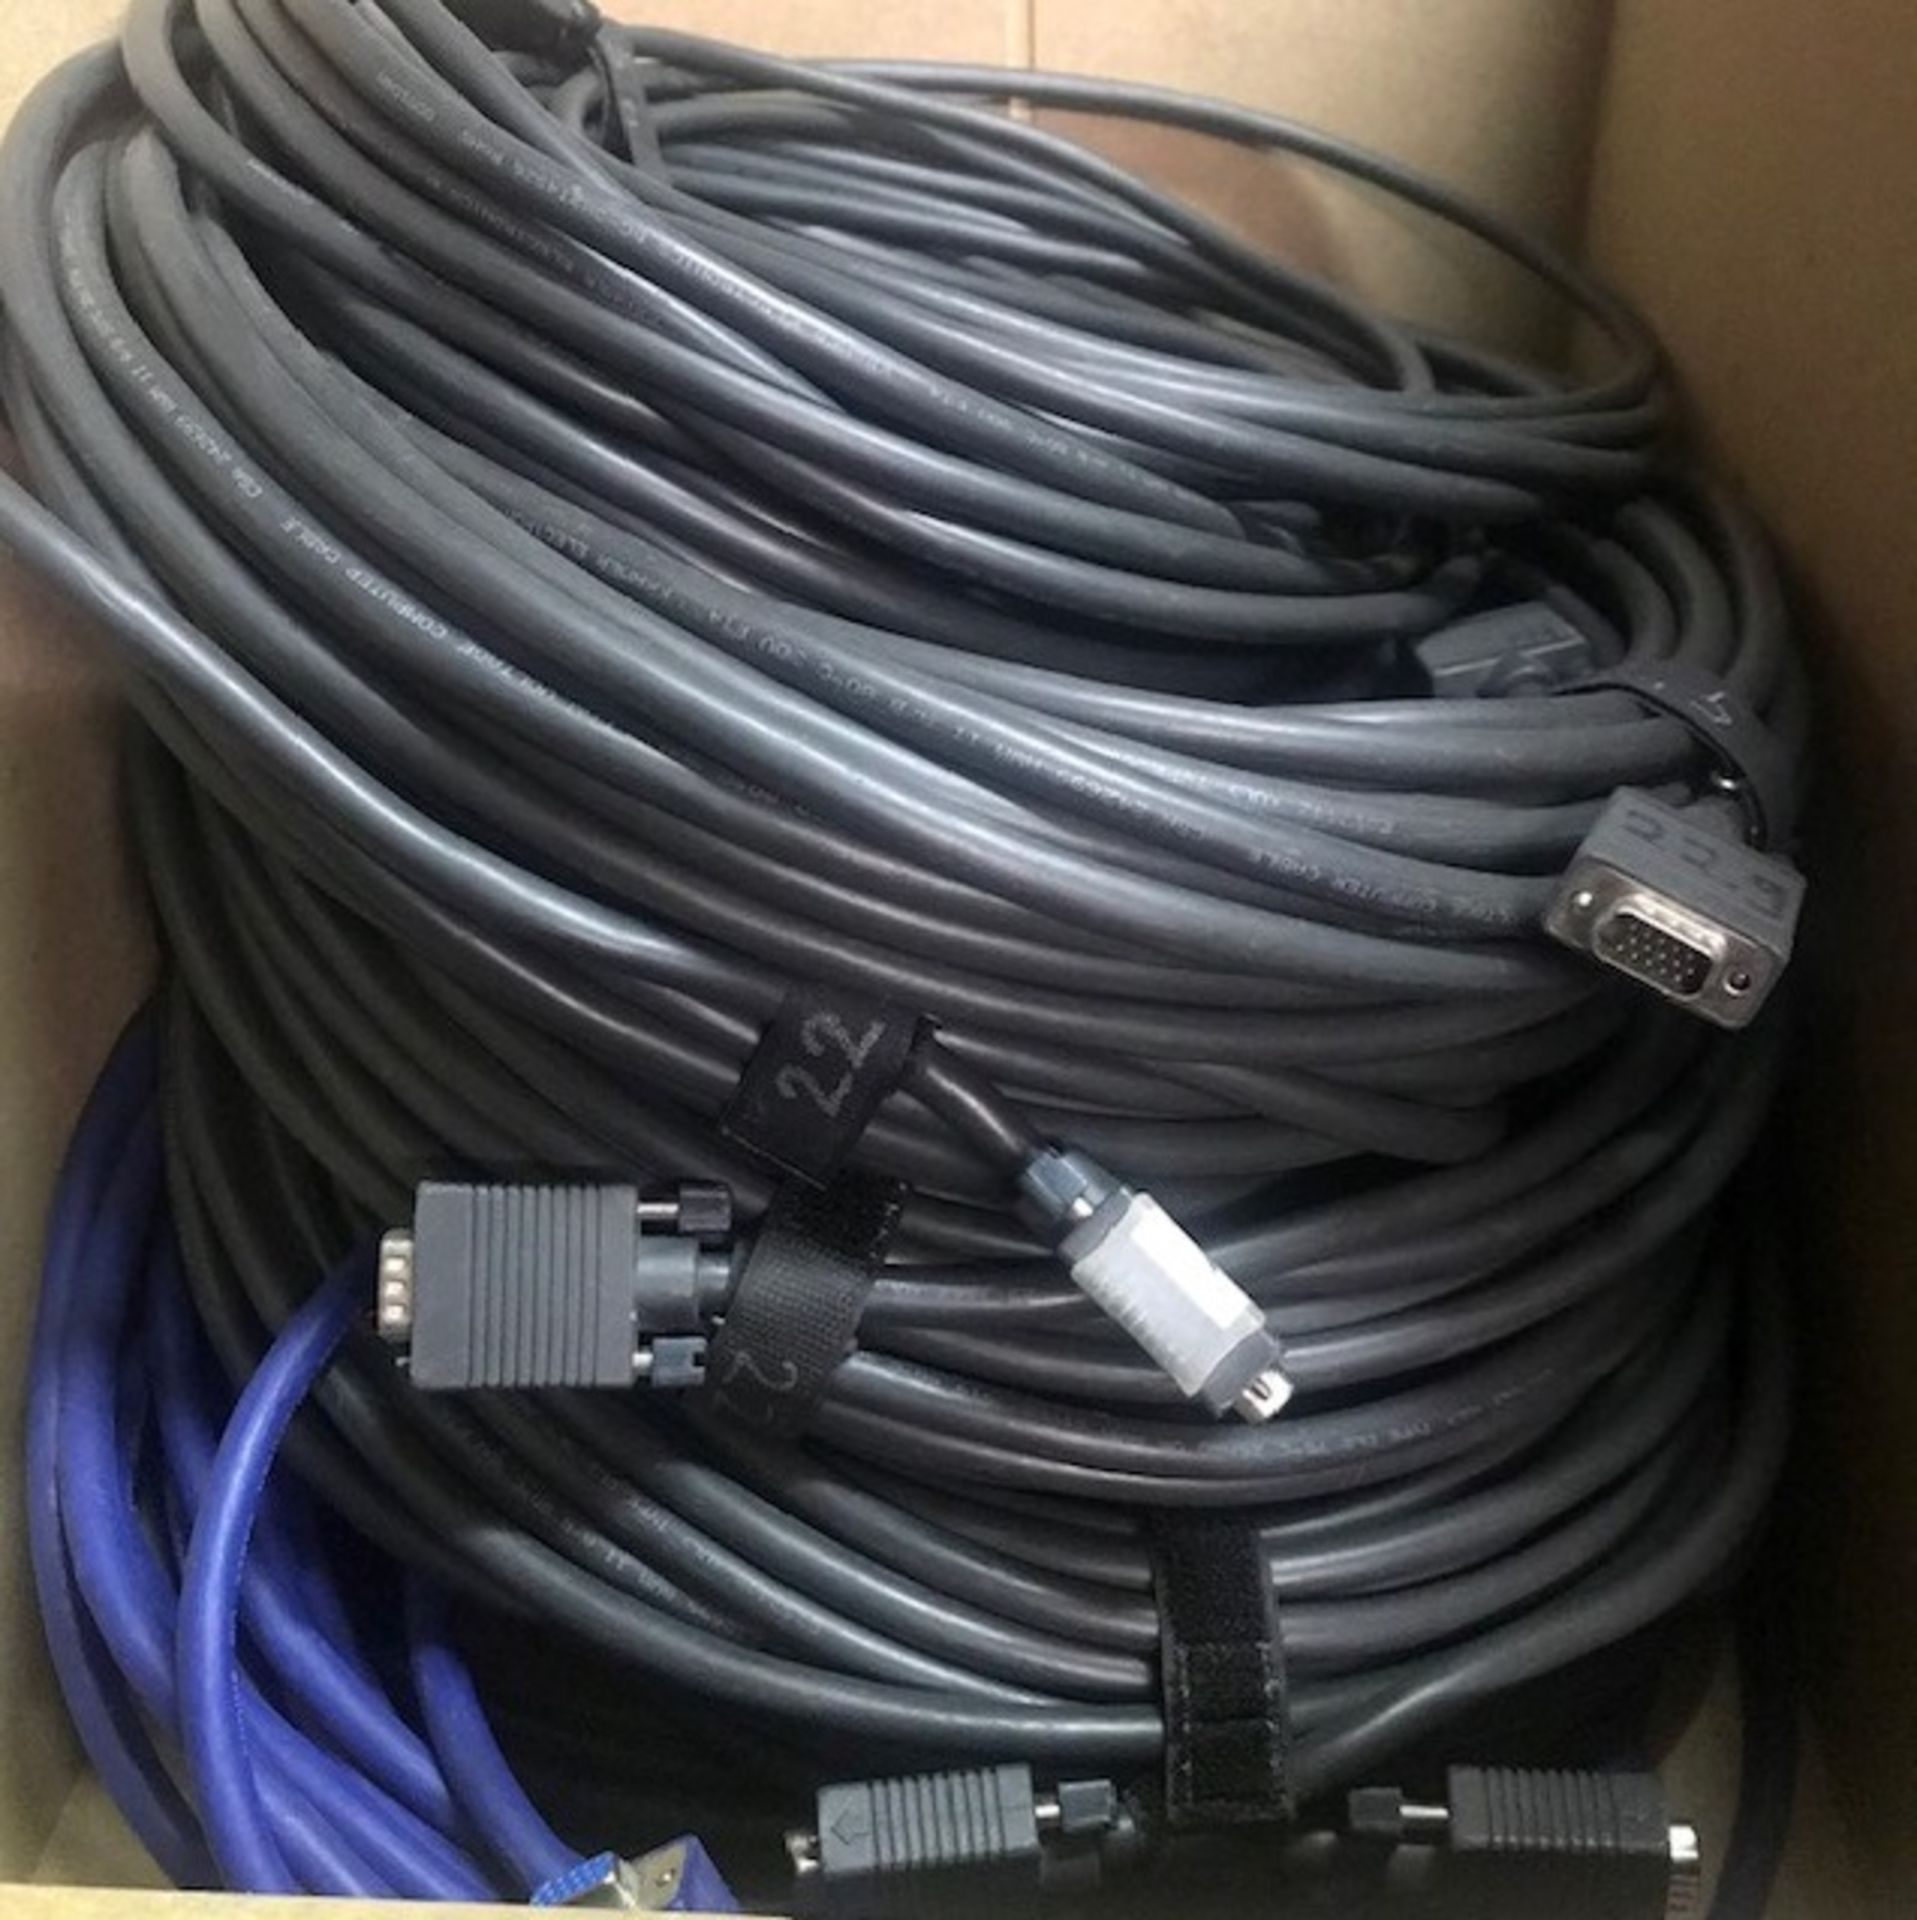 6 x VGA Cable 22m Length In Box - Ref: 6315 - CL581 - Location: Altrincham WA14Items will be